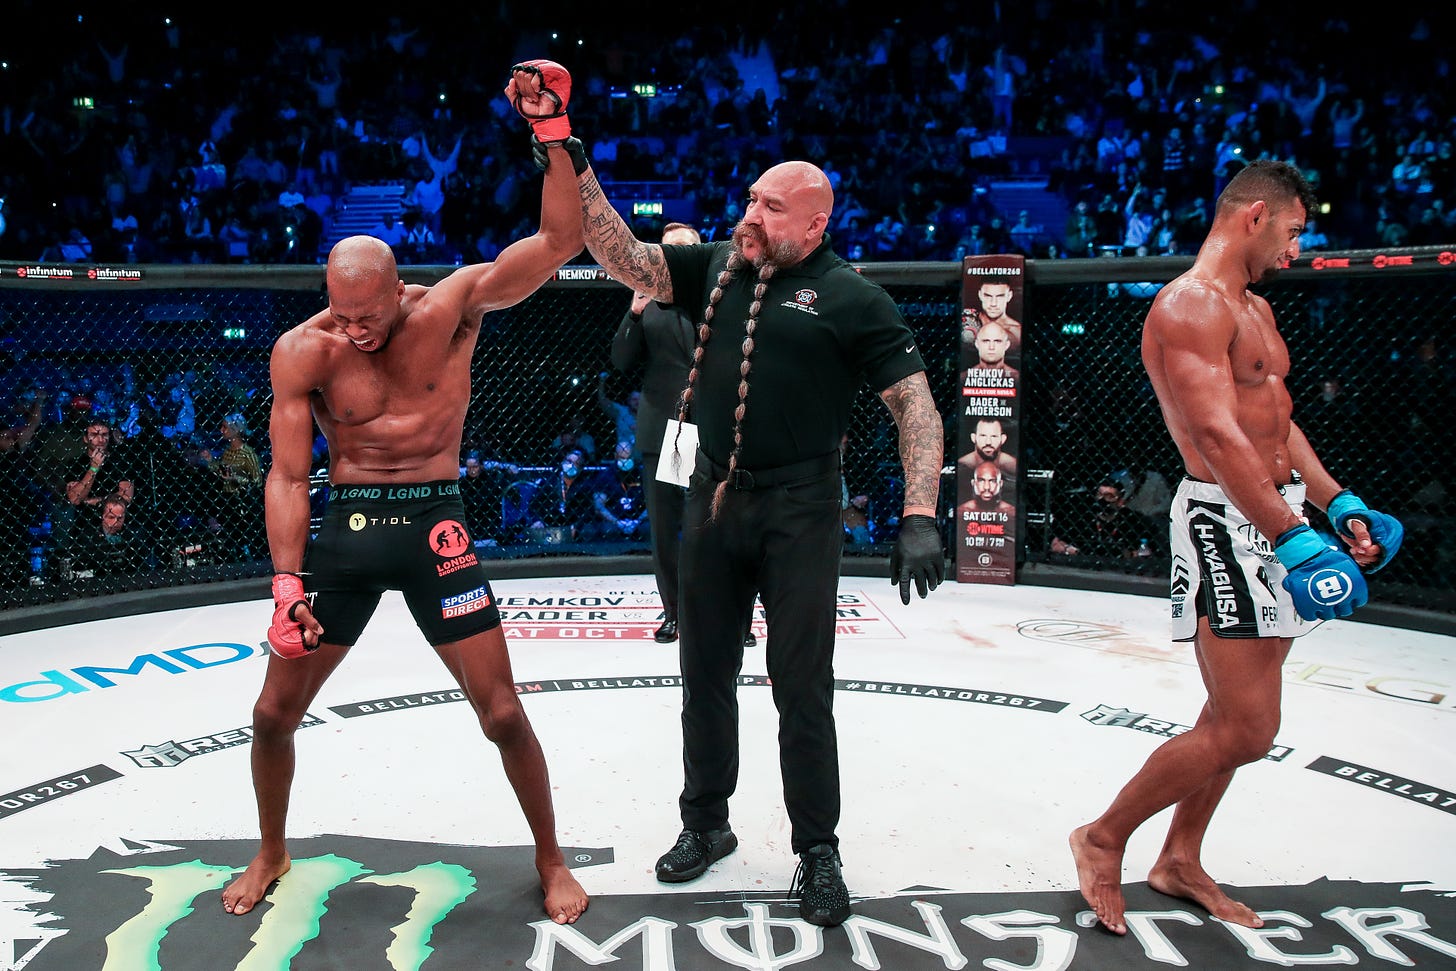 Michael Page gets his arm raised by a referee while Douglas Lima walks away in shock.